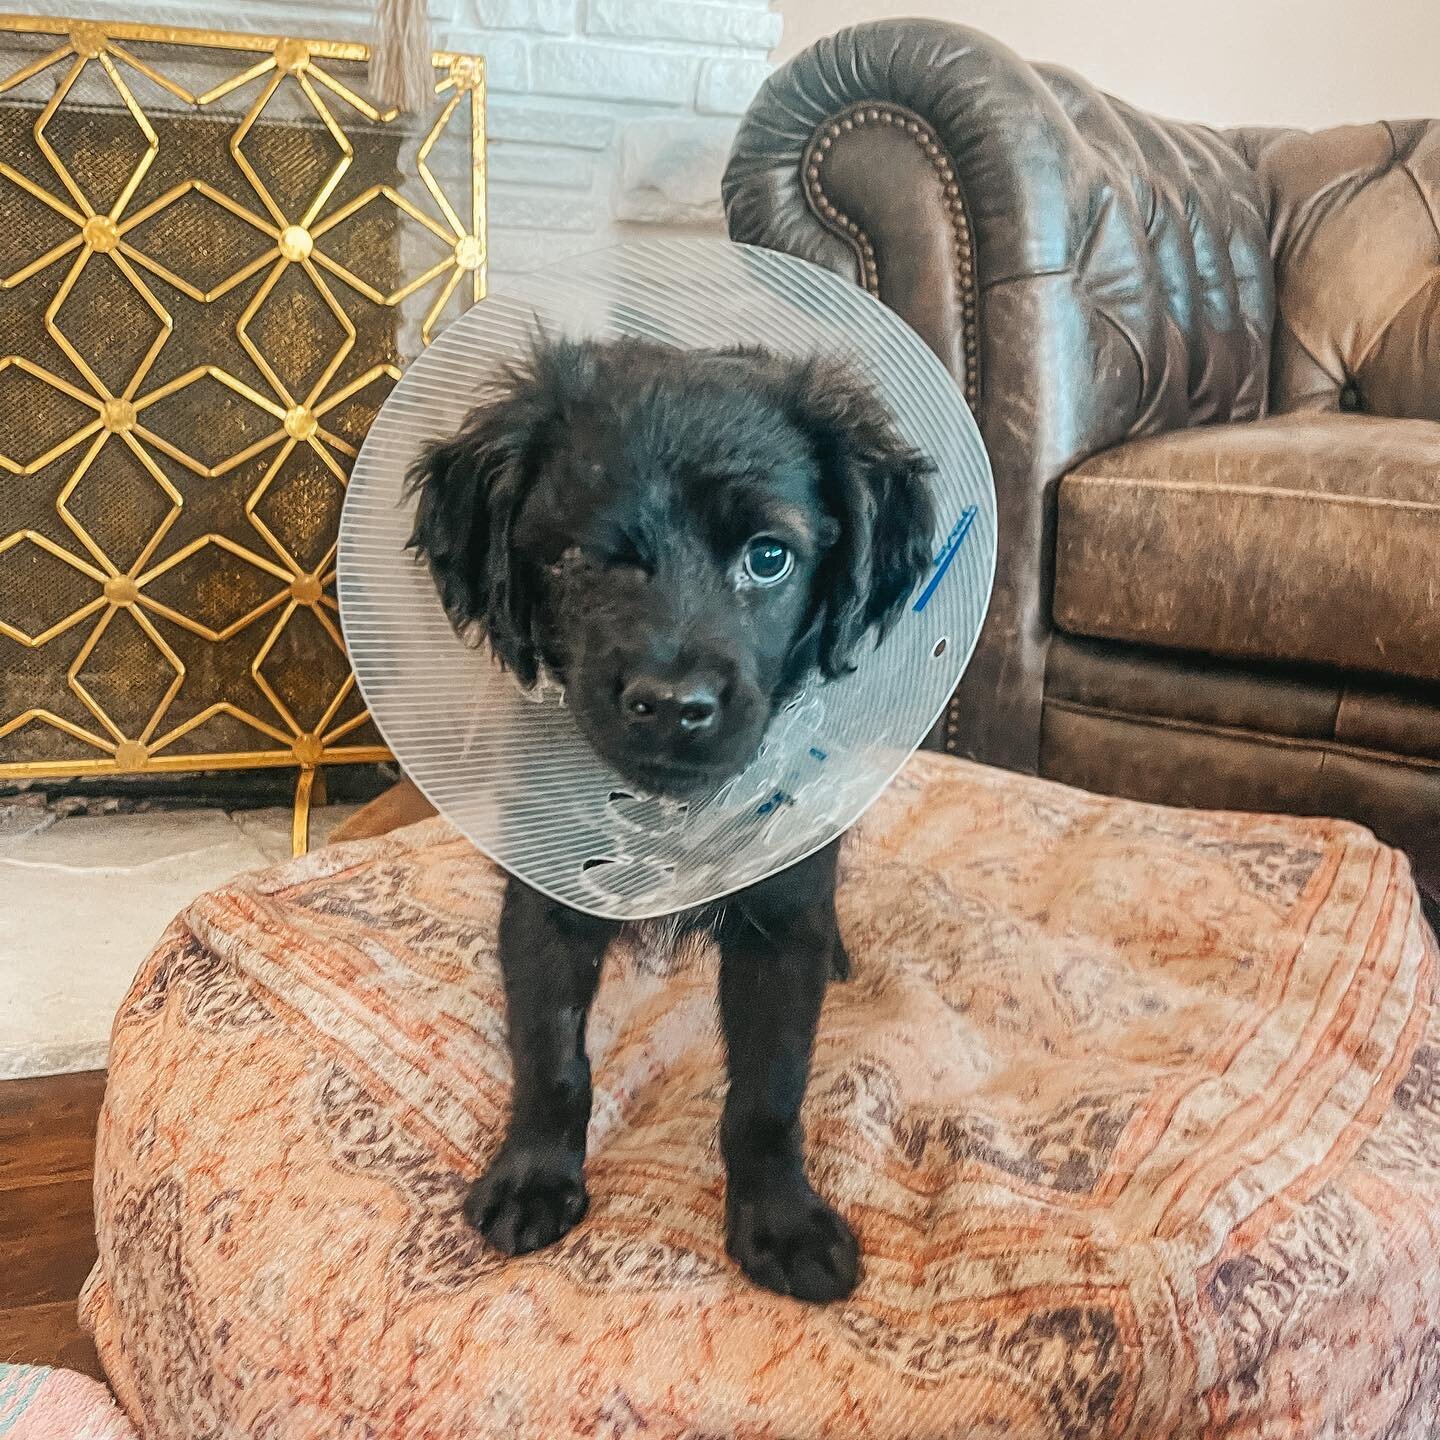 Muse is home and recovering from her eye removal surgery. Thank you for the wonderful staff at paws and claws in palm desert for helping this sweet baby girl. While she heals we will be giving her lots of love, she will have her stitches removed in a